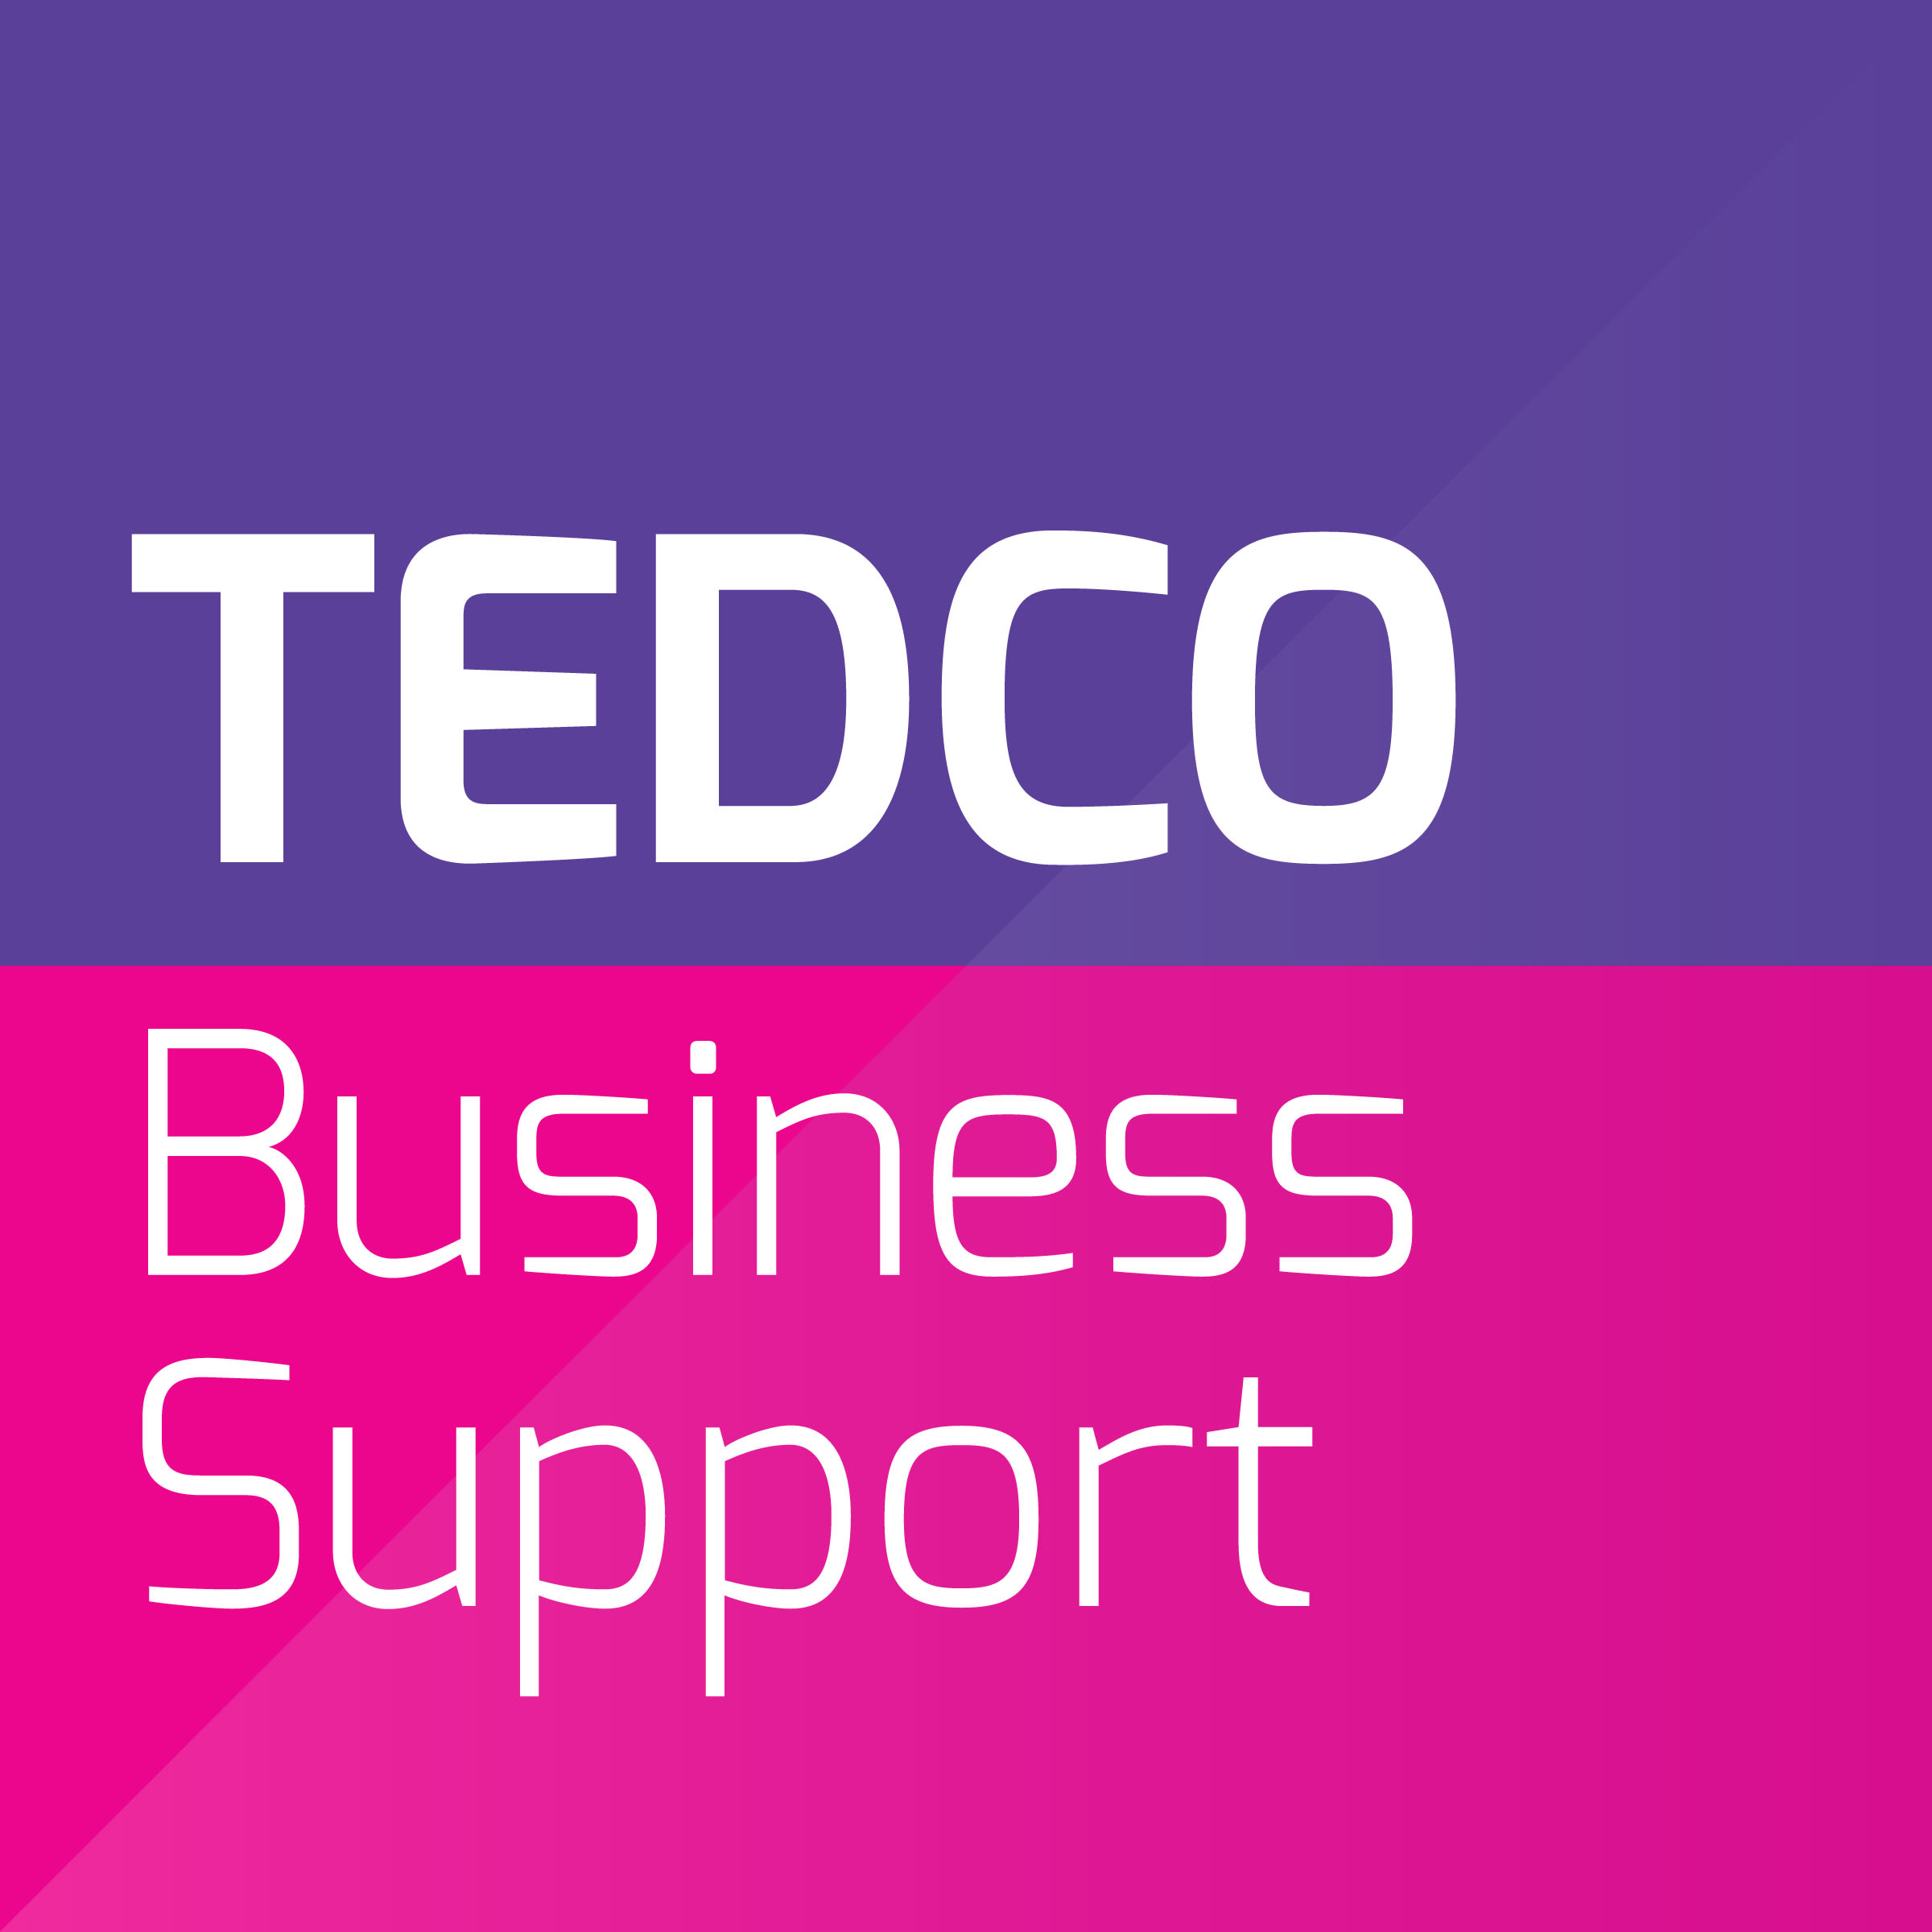 Tedco Business Support logo